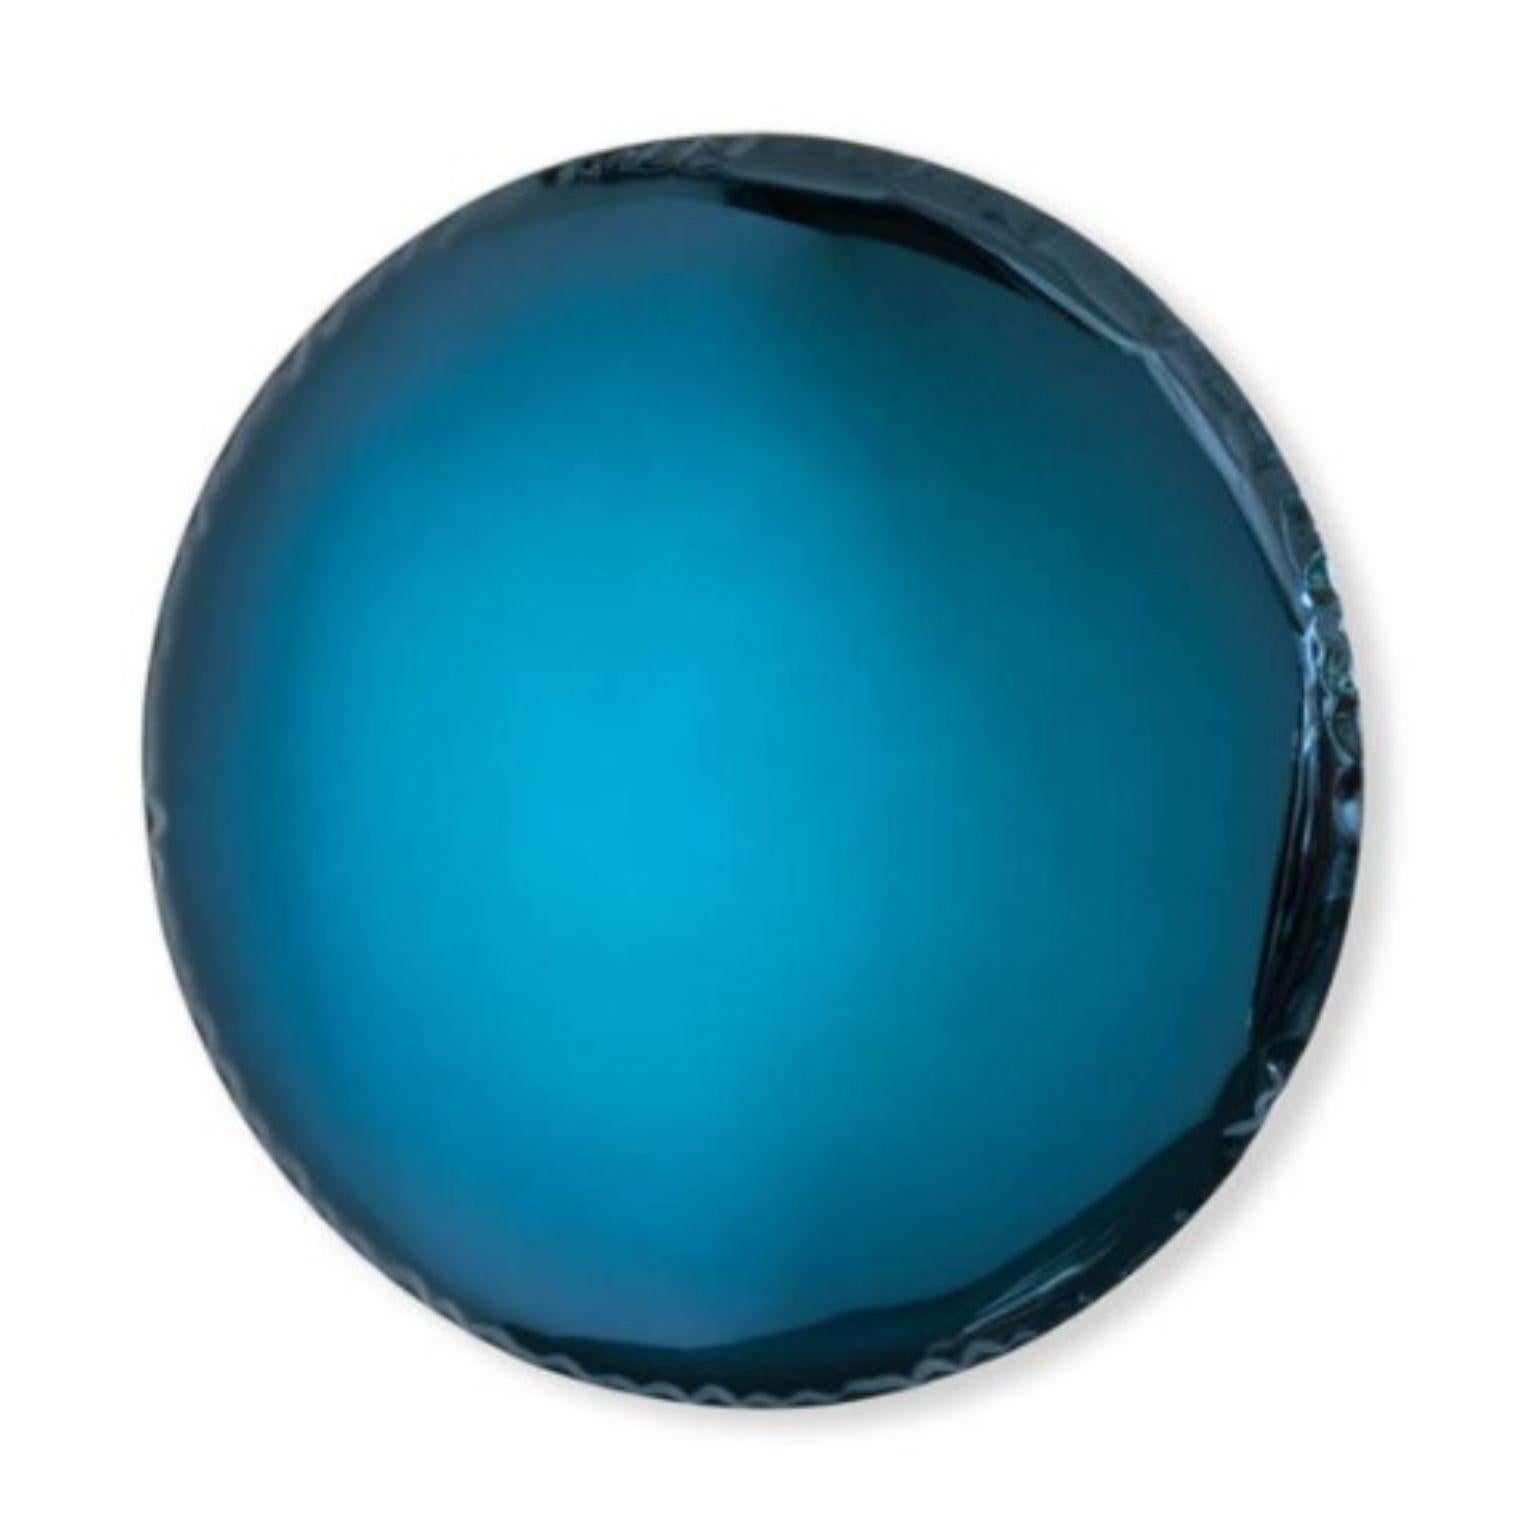 Deep Space Blue Oko 95 sculptural wall mirror by Zieta
Dimensions: Diameter 95 x D 6 cm 
Material: Stainless steel. 
Finish: Deep Space Blue.
Available in finishes: Stainless Steel, Deep Space Blue, Emerald, Saphire, Saphire/Emerald, Dark Matter,